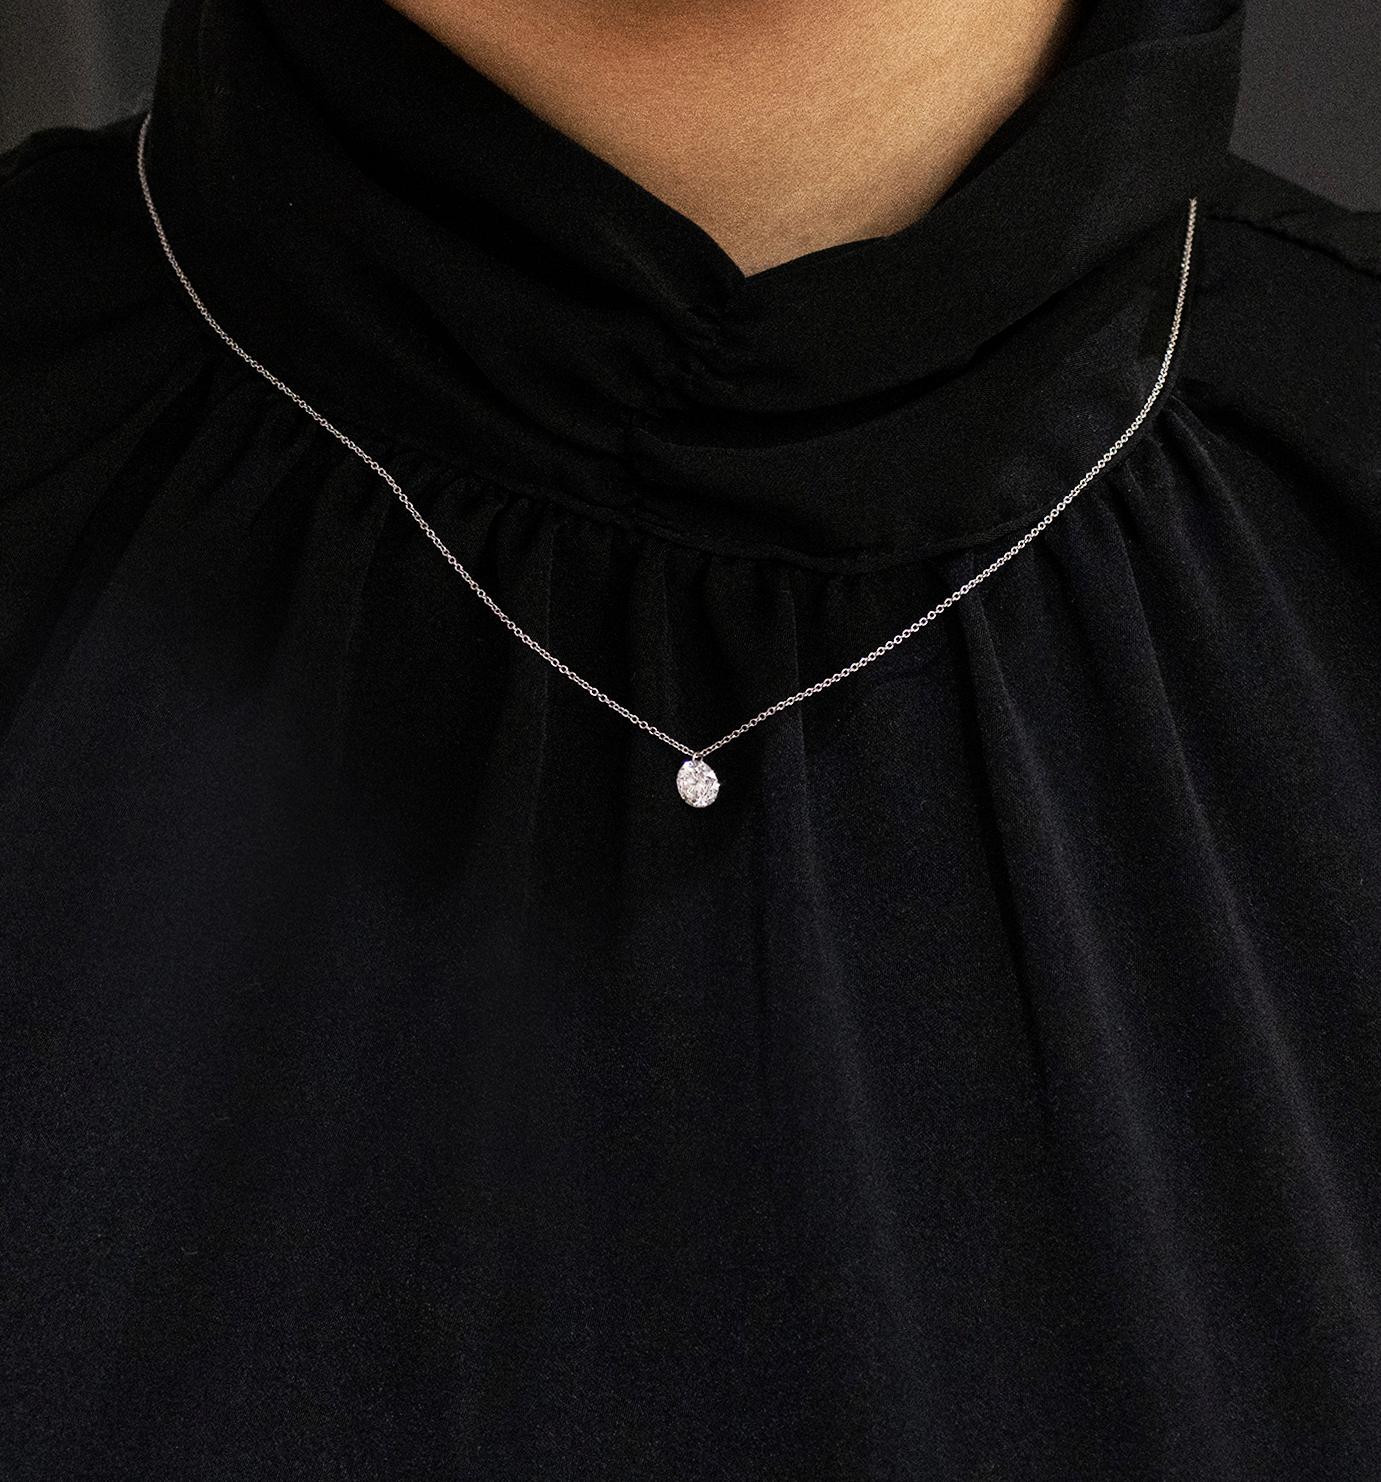 A unique solitaire pendant necklace showcasing a 0.74 carat round brilliant diamond, finely drilled to attach to a white gold bale made in 14 karat white gold. Attached to an 16 inch white gold chain (adjustable upon request).